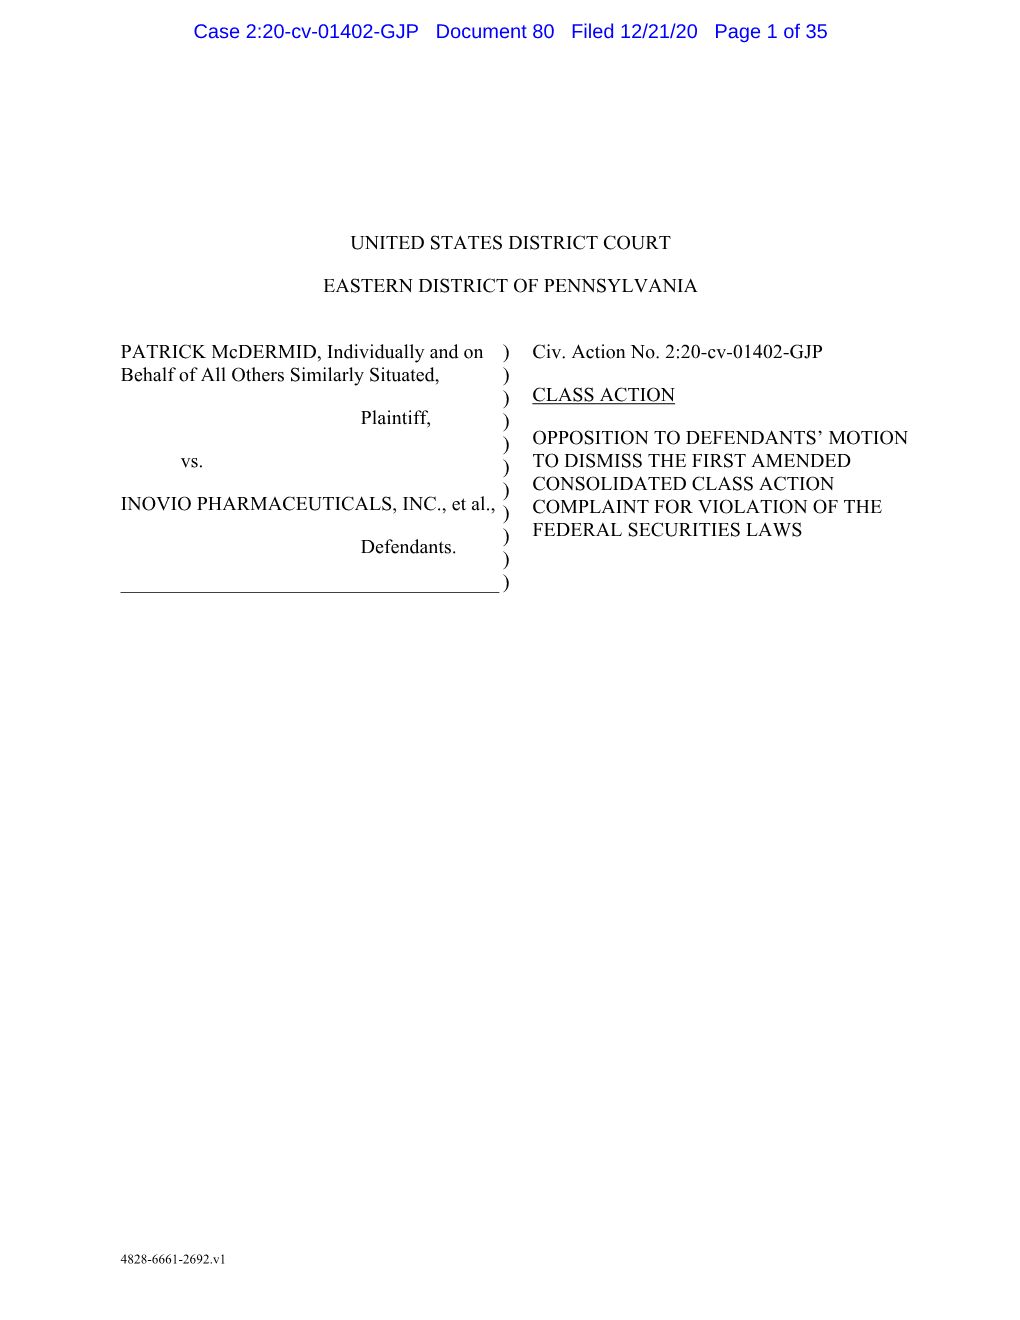 Case 2:20-Cv-01402-GJP Document 80 Filed 12/21/20 Page 1 of 35